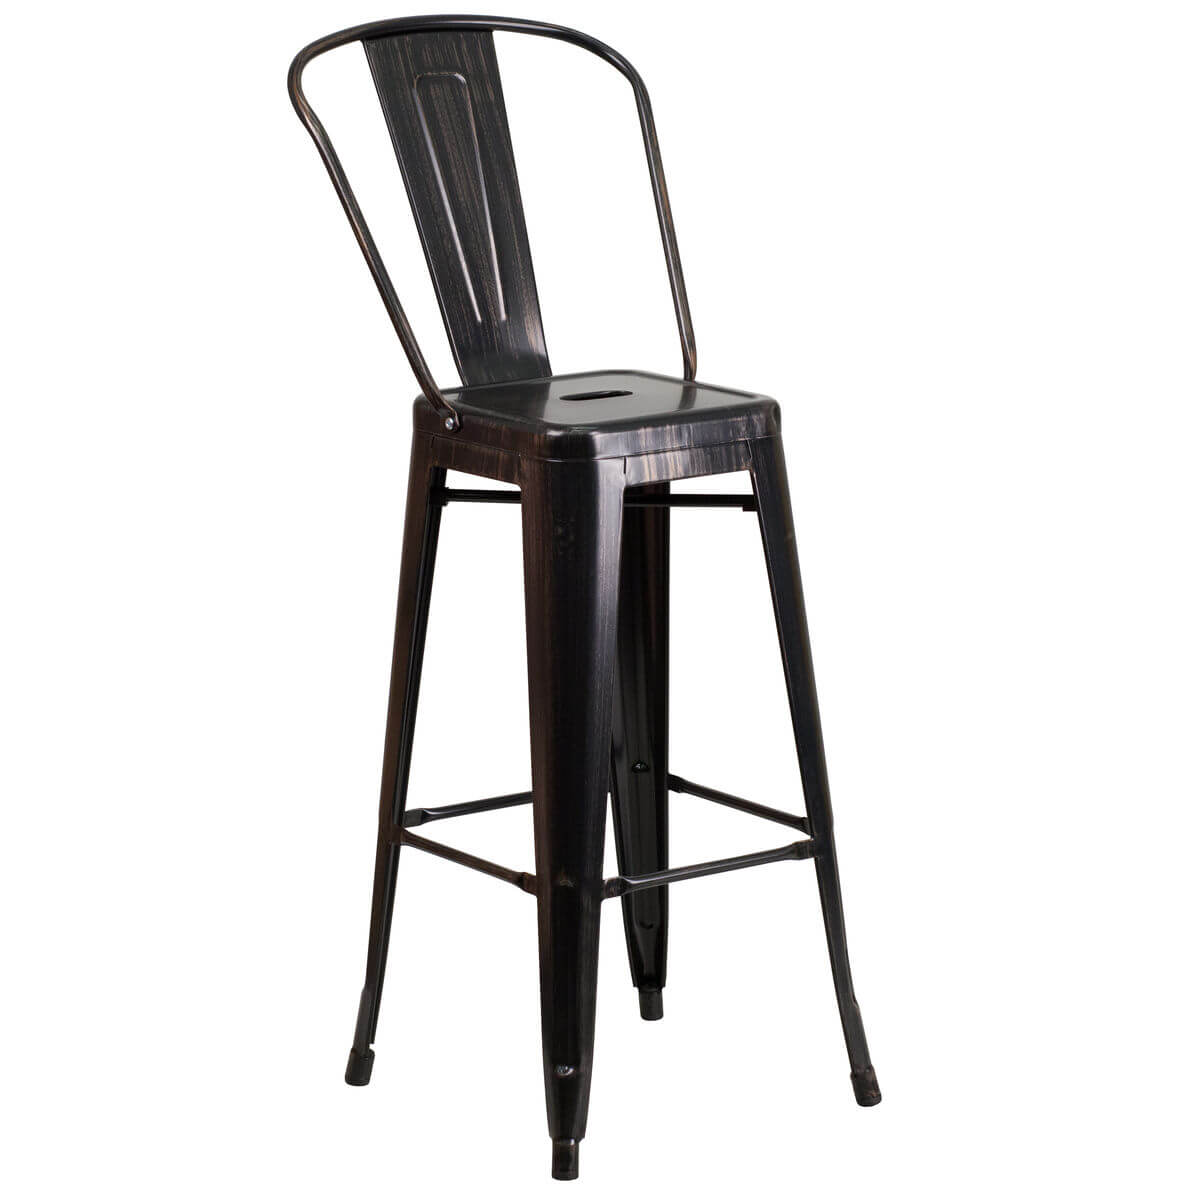 Gold Bistro Style Metal Bar Stool, Antique Metal Bar Stools With Backs